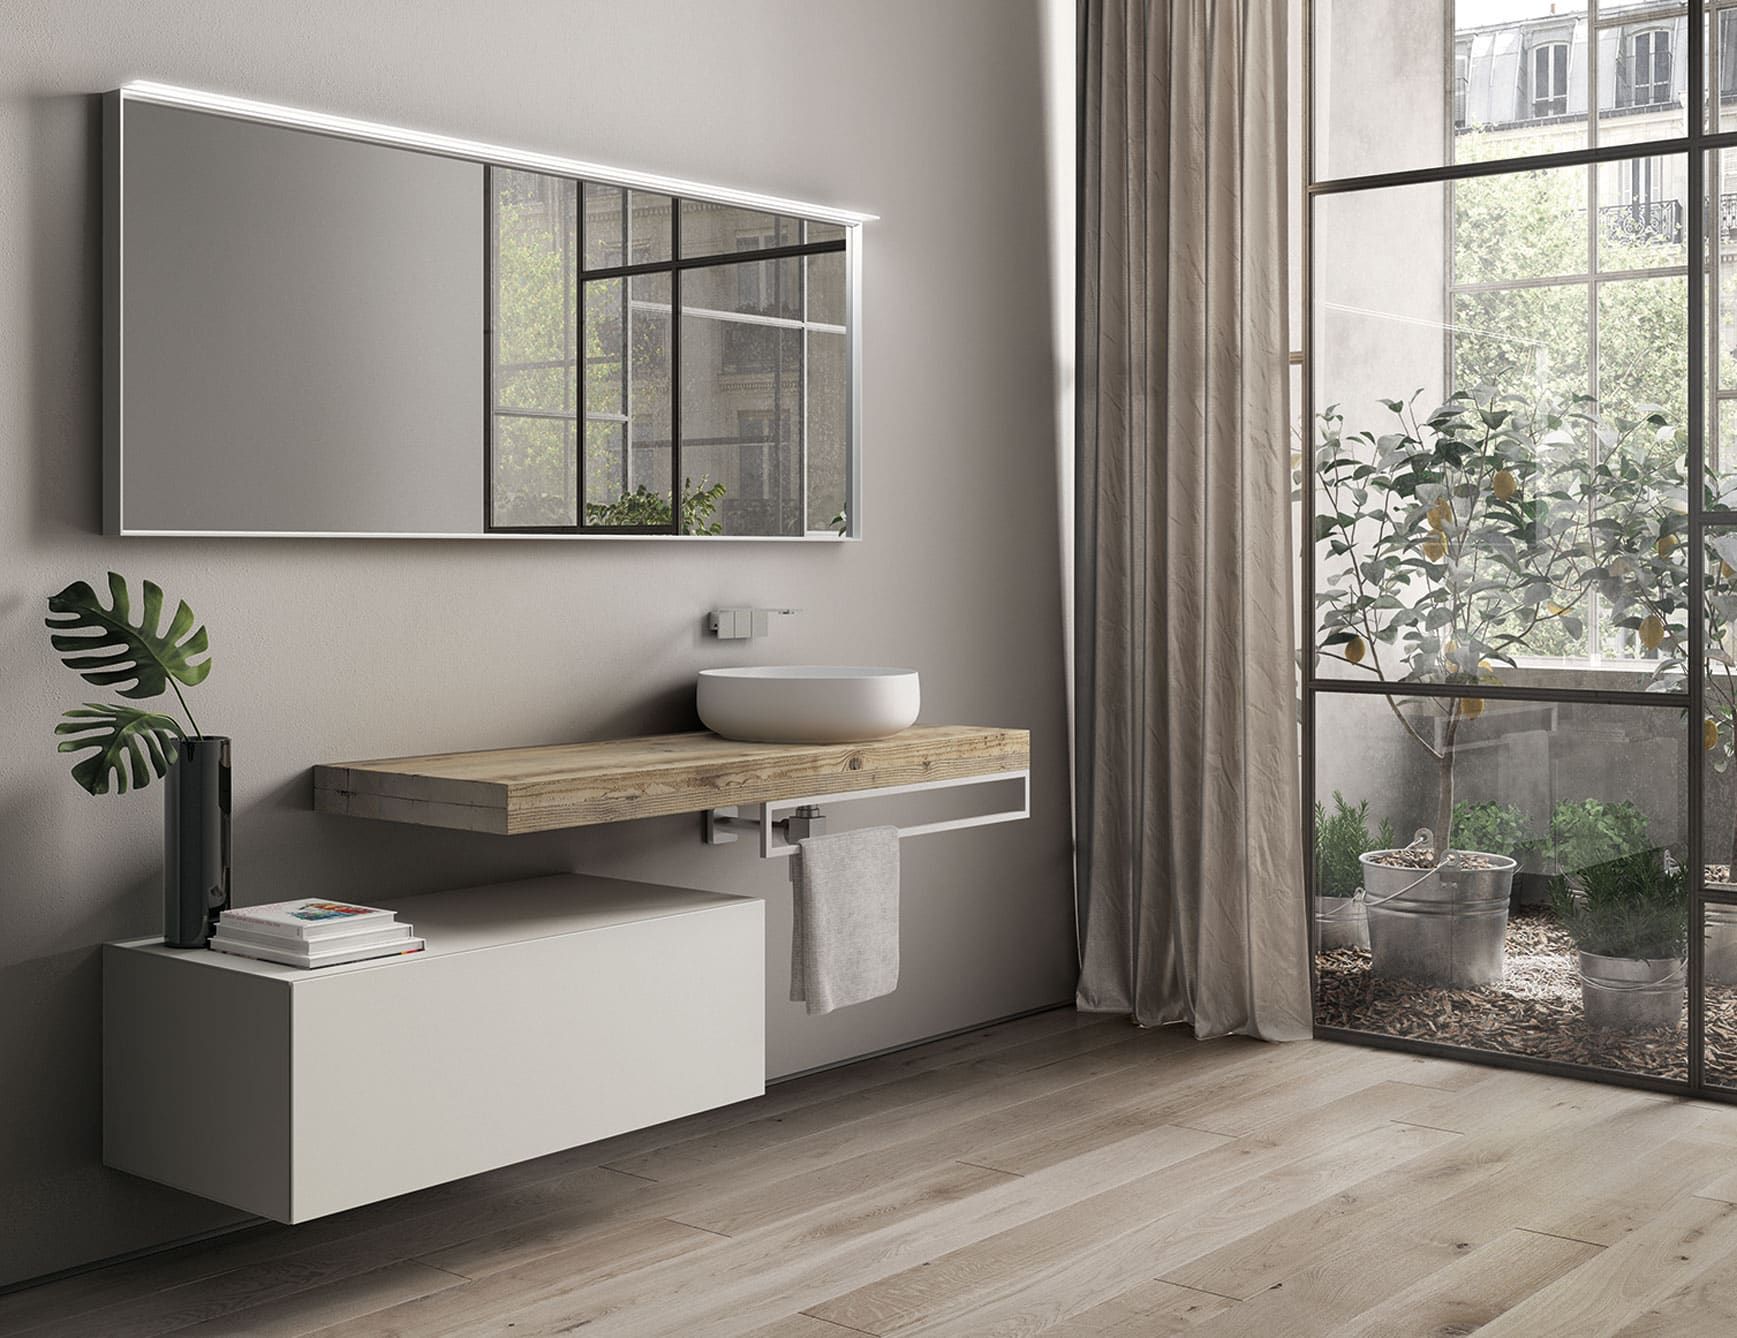 Composition 13 modern Italian bathroom vanity with white lacquered wood